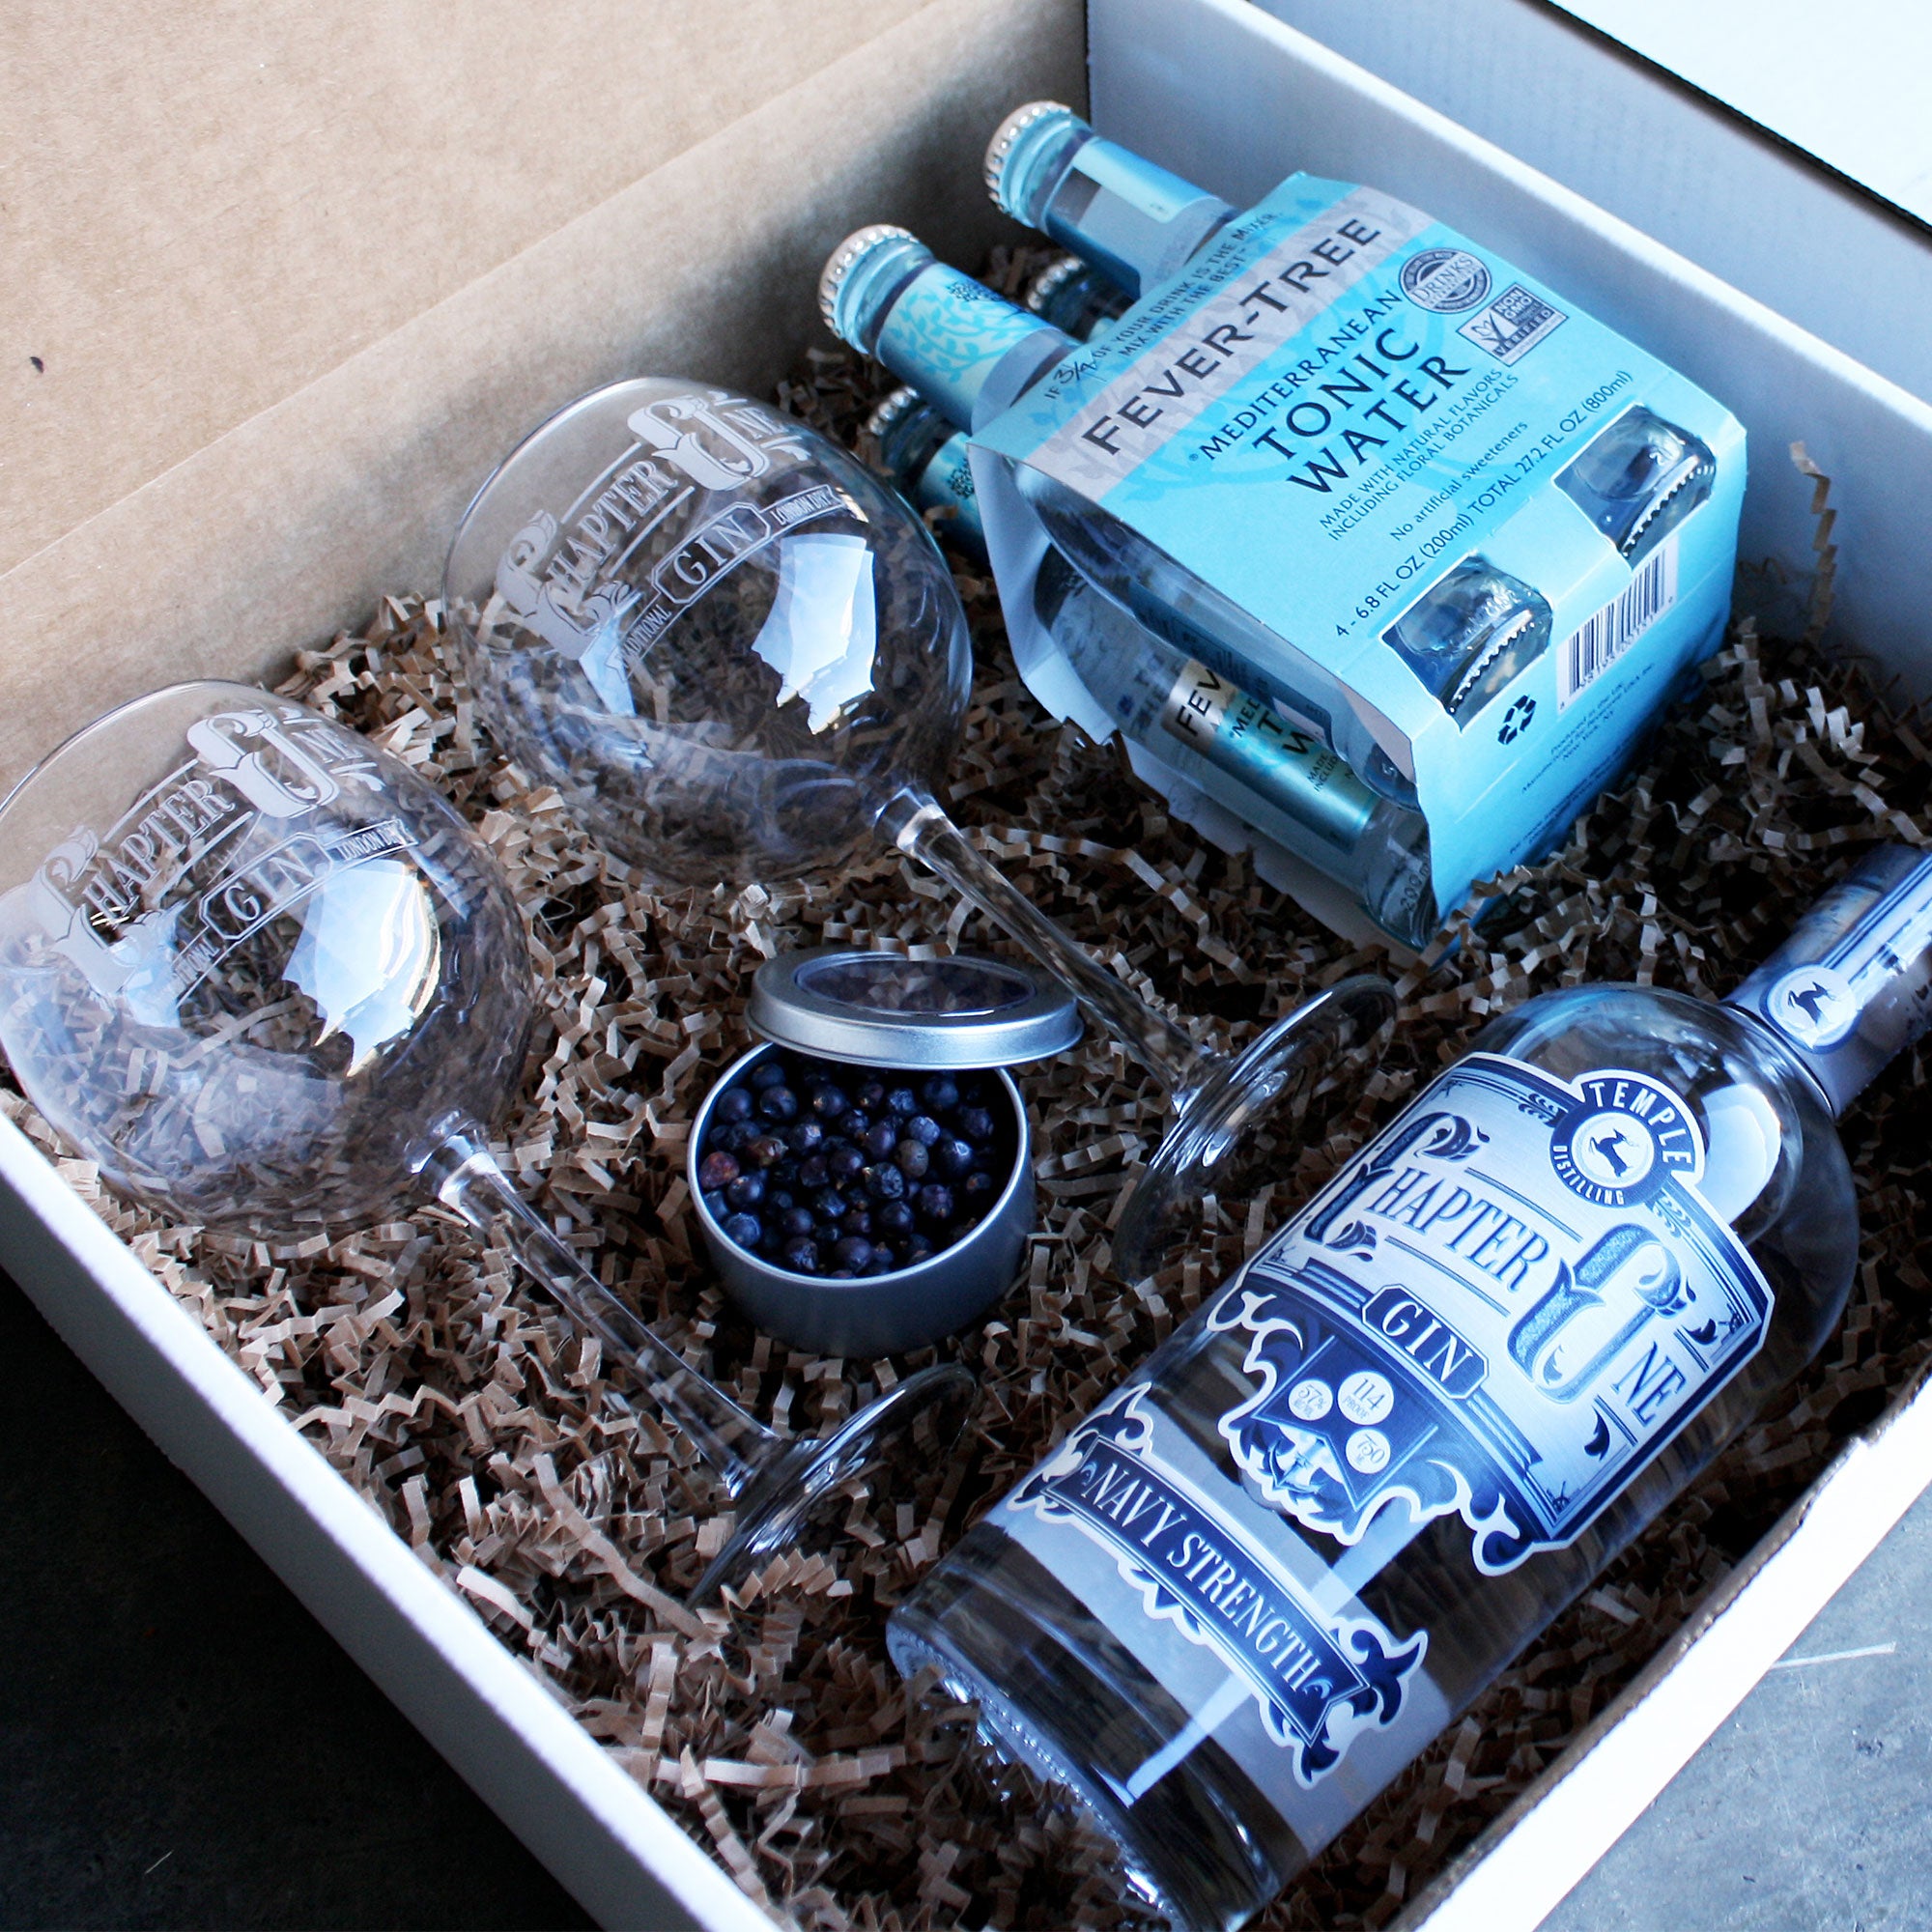 Gin & Tonic Gift Set - Navy Strength - Temple Distilling Company